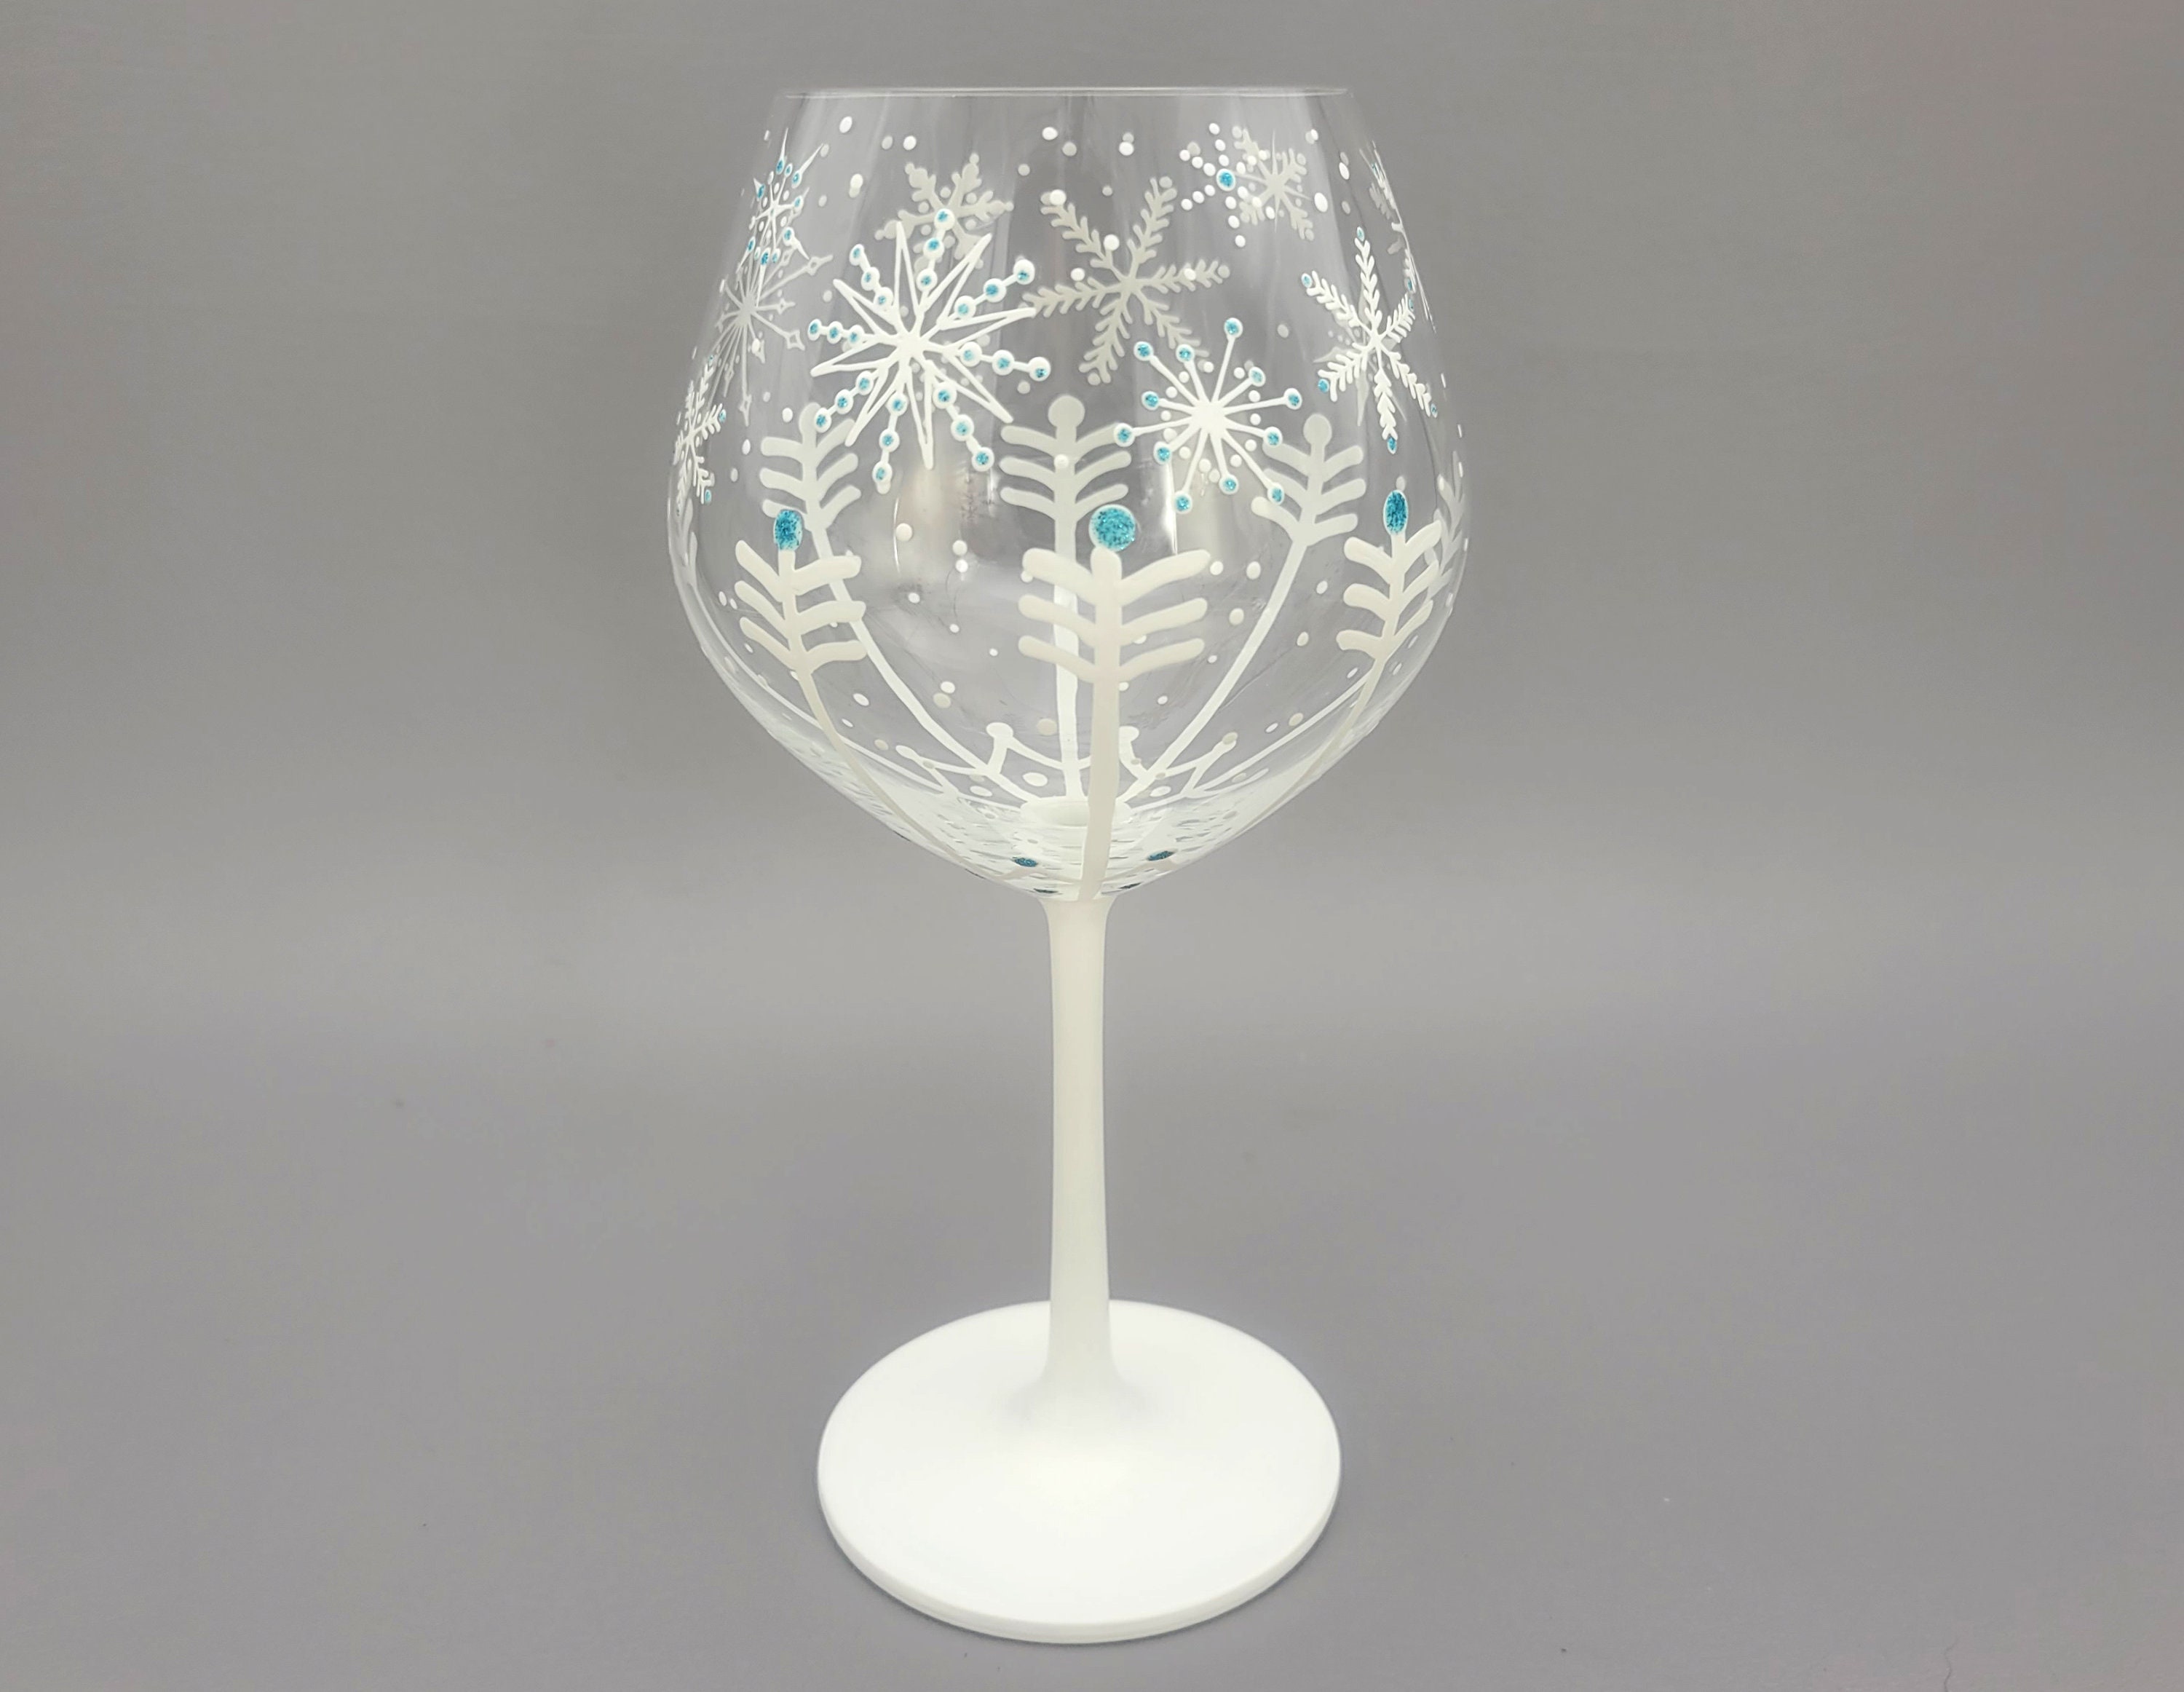 Hand Painted Wine Glasses - Harvest Leaf - Handmade in the USA